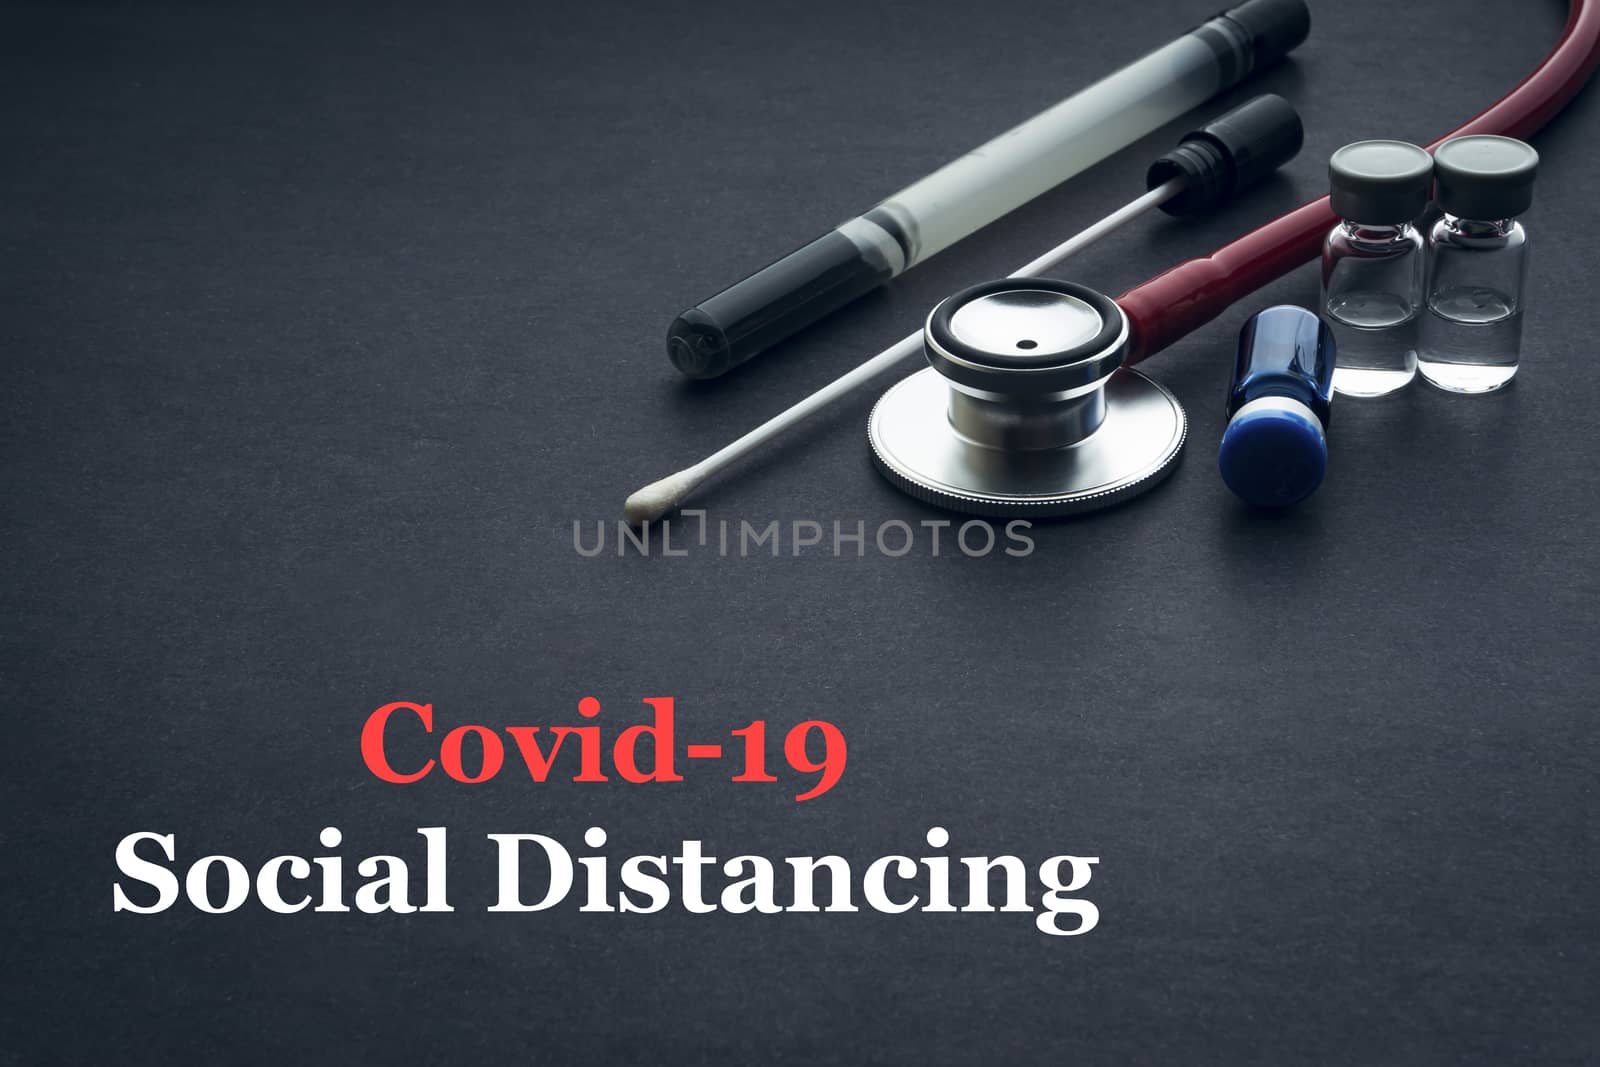 COVID-19 or CORONAVIRUS SOCIAL DISTANCING text with stethoscope, medical swab and vial on black background. Covid-19 or Coronavirus concept. 